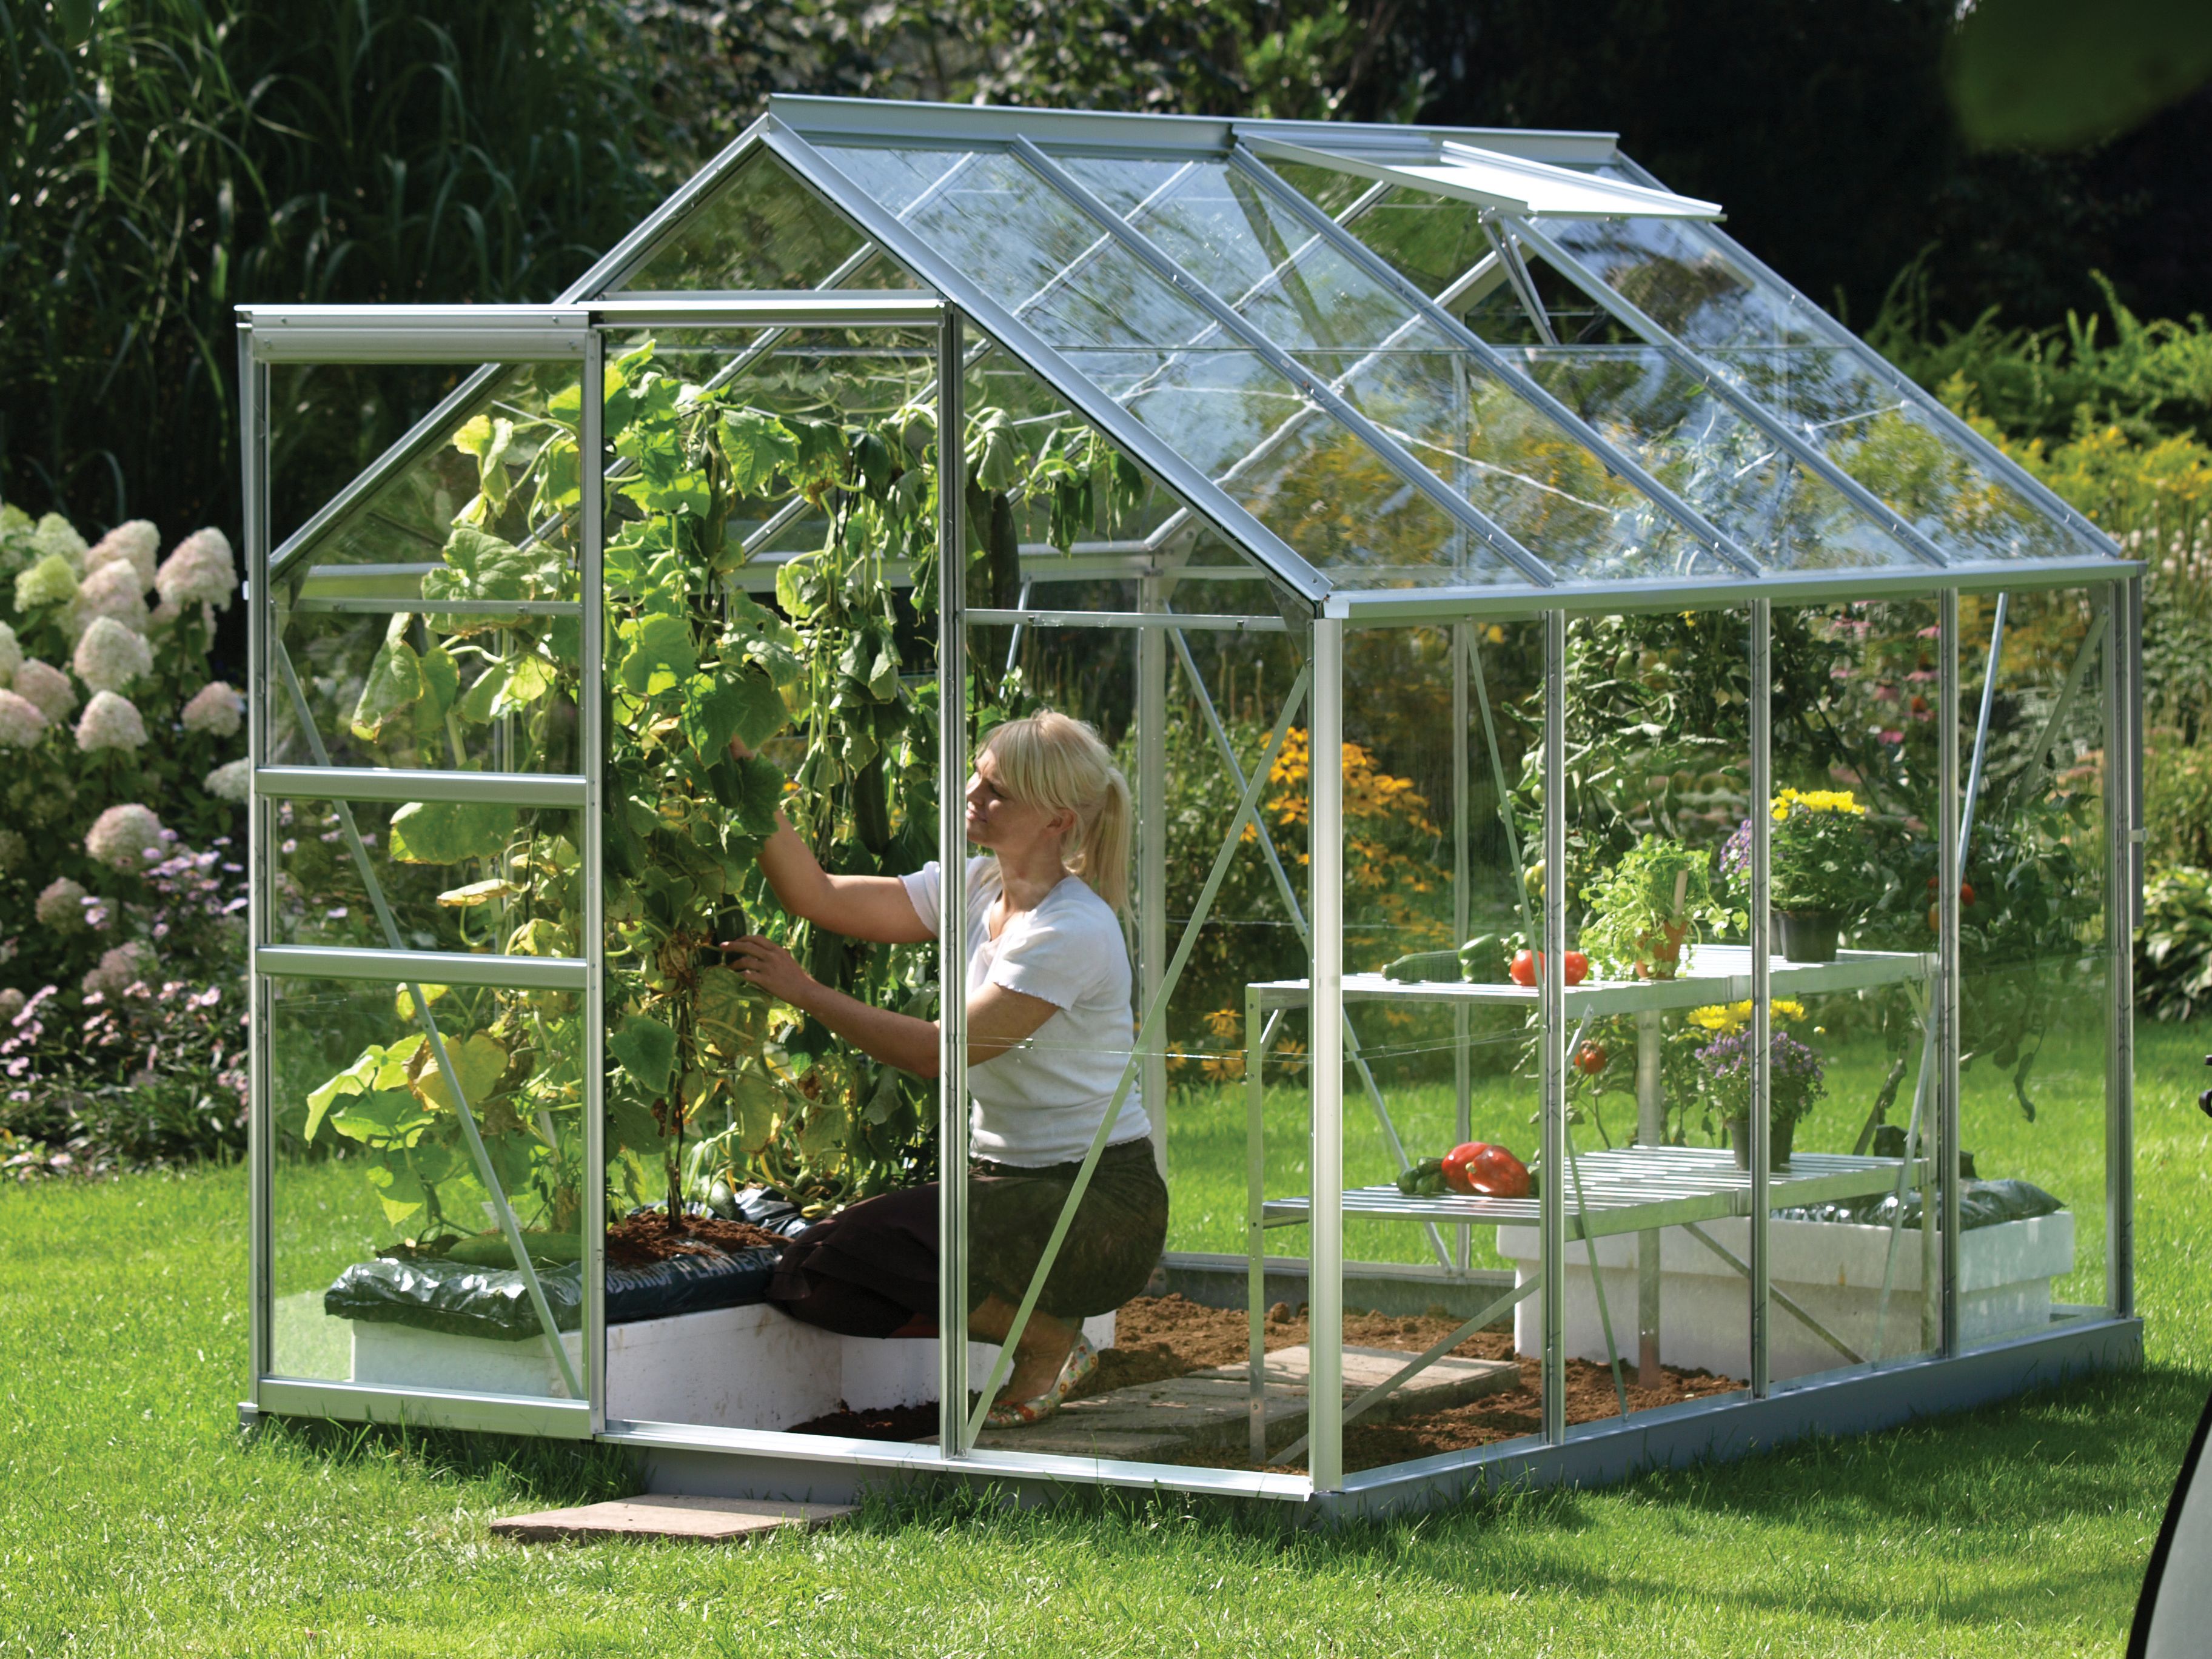 Image of Vitavia Venus 8 x 6ft Horticultural Glass Greenhouse with Steel Base